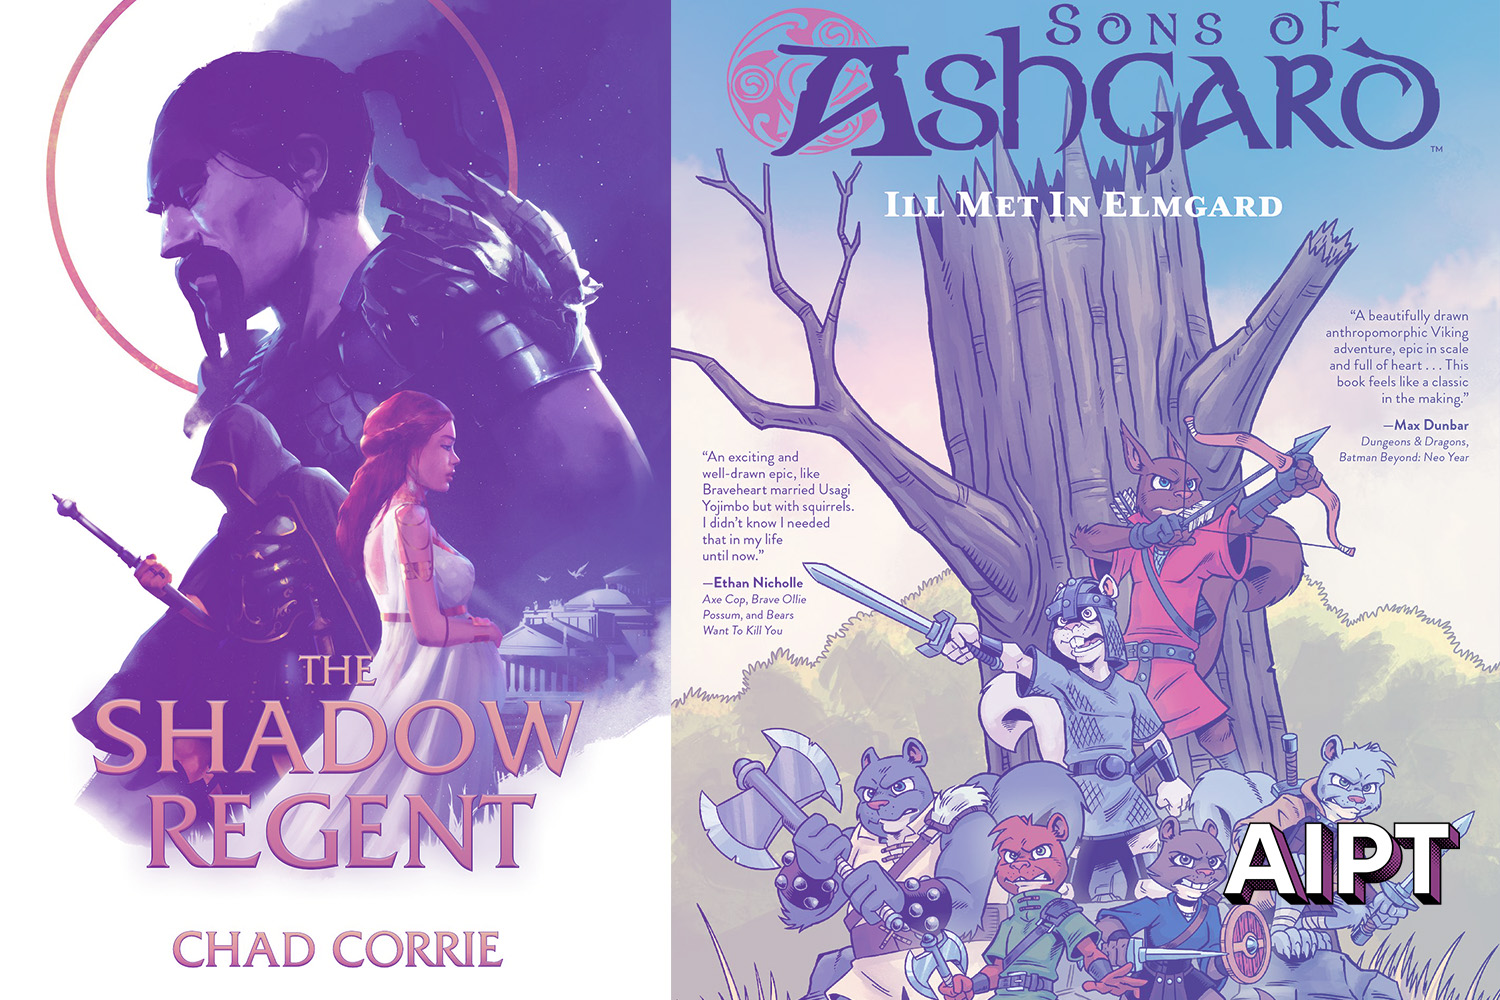 Dark Horse sets 2023 dates for Chad Corrie's 'Sons of Ashgard' and 'The Shadow Regent'